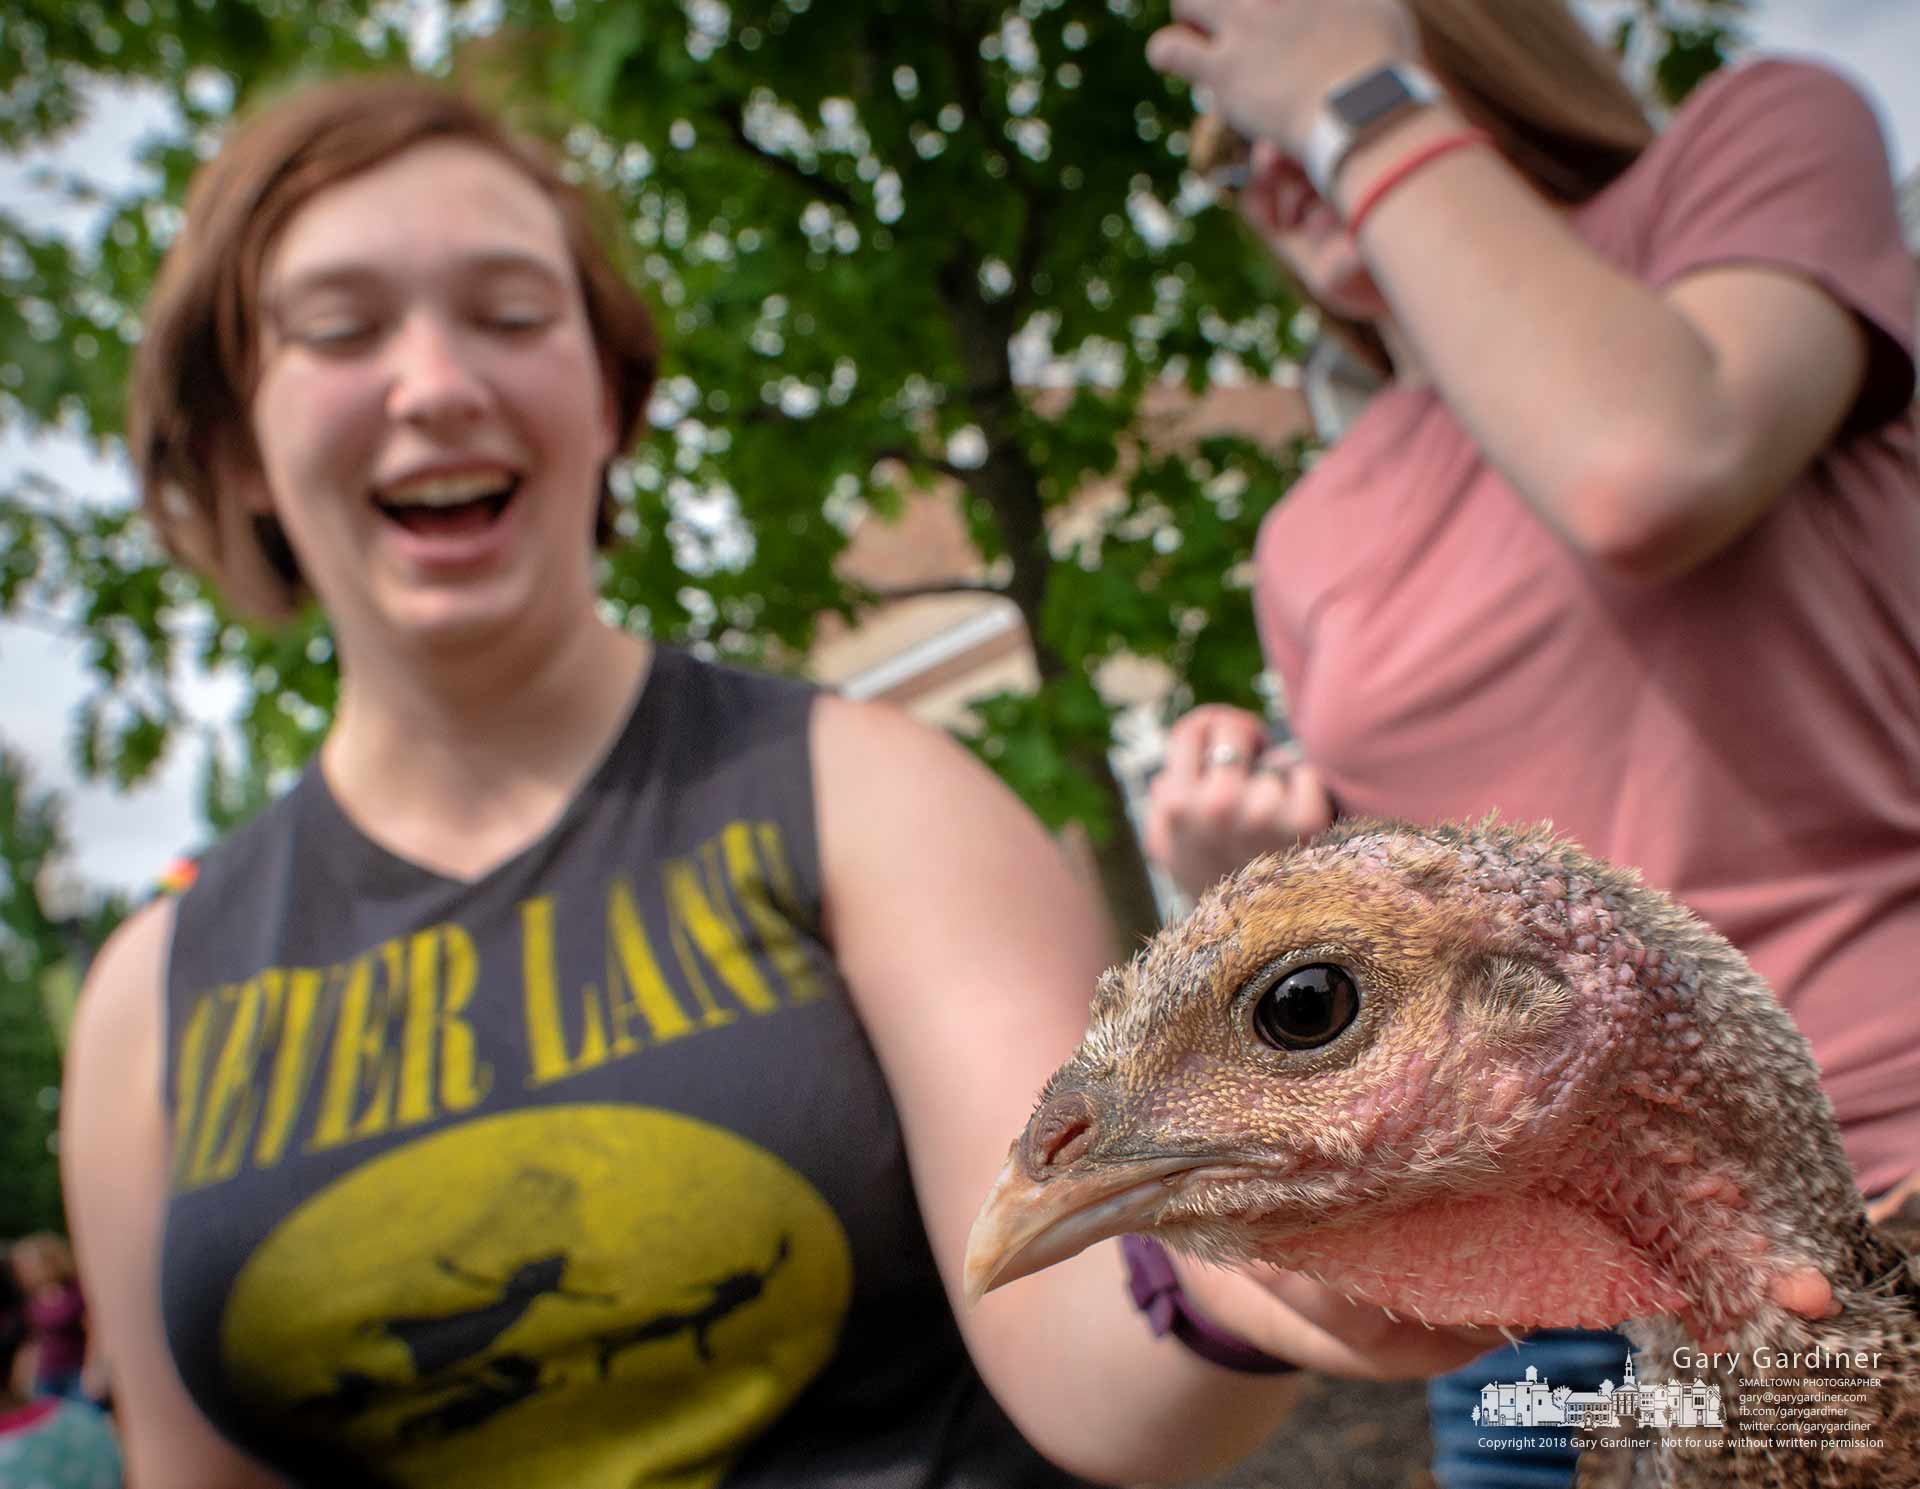 Students young and old had the opportunity to handle farm animals including this turkey chick on the front lawn of the Westerville Public Library Wednesday. My Final Photo for May 16, 2018. 